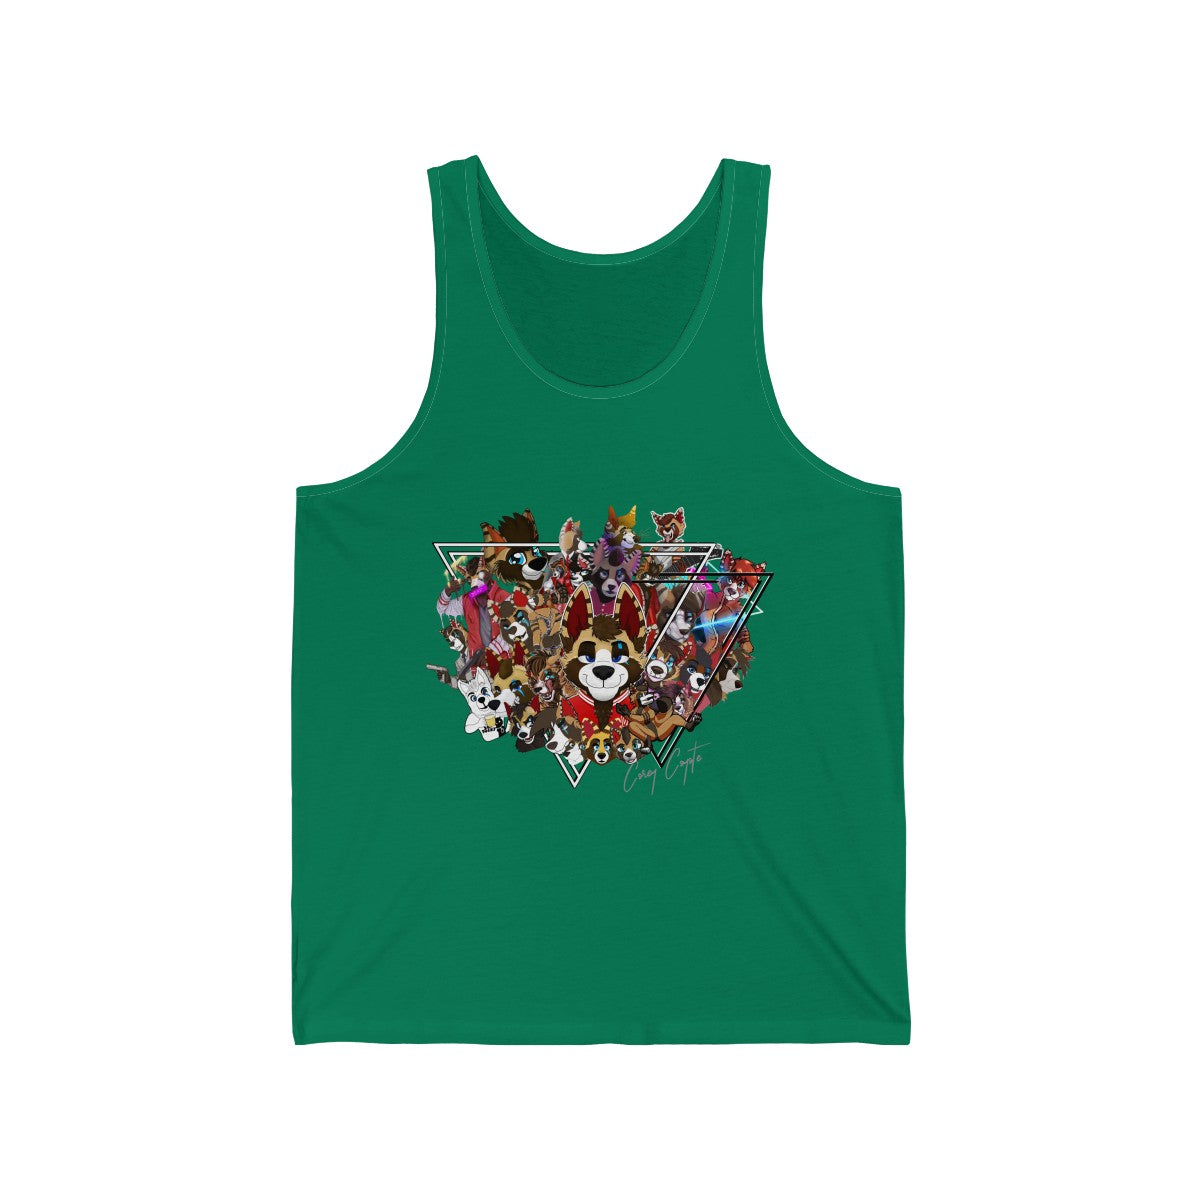 For The Fans - Tank Top Tank Top Corey Coyote Green XS 